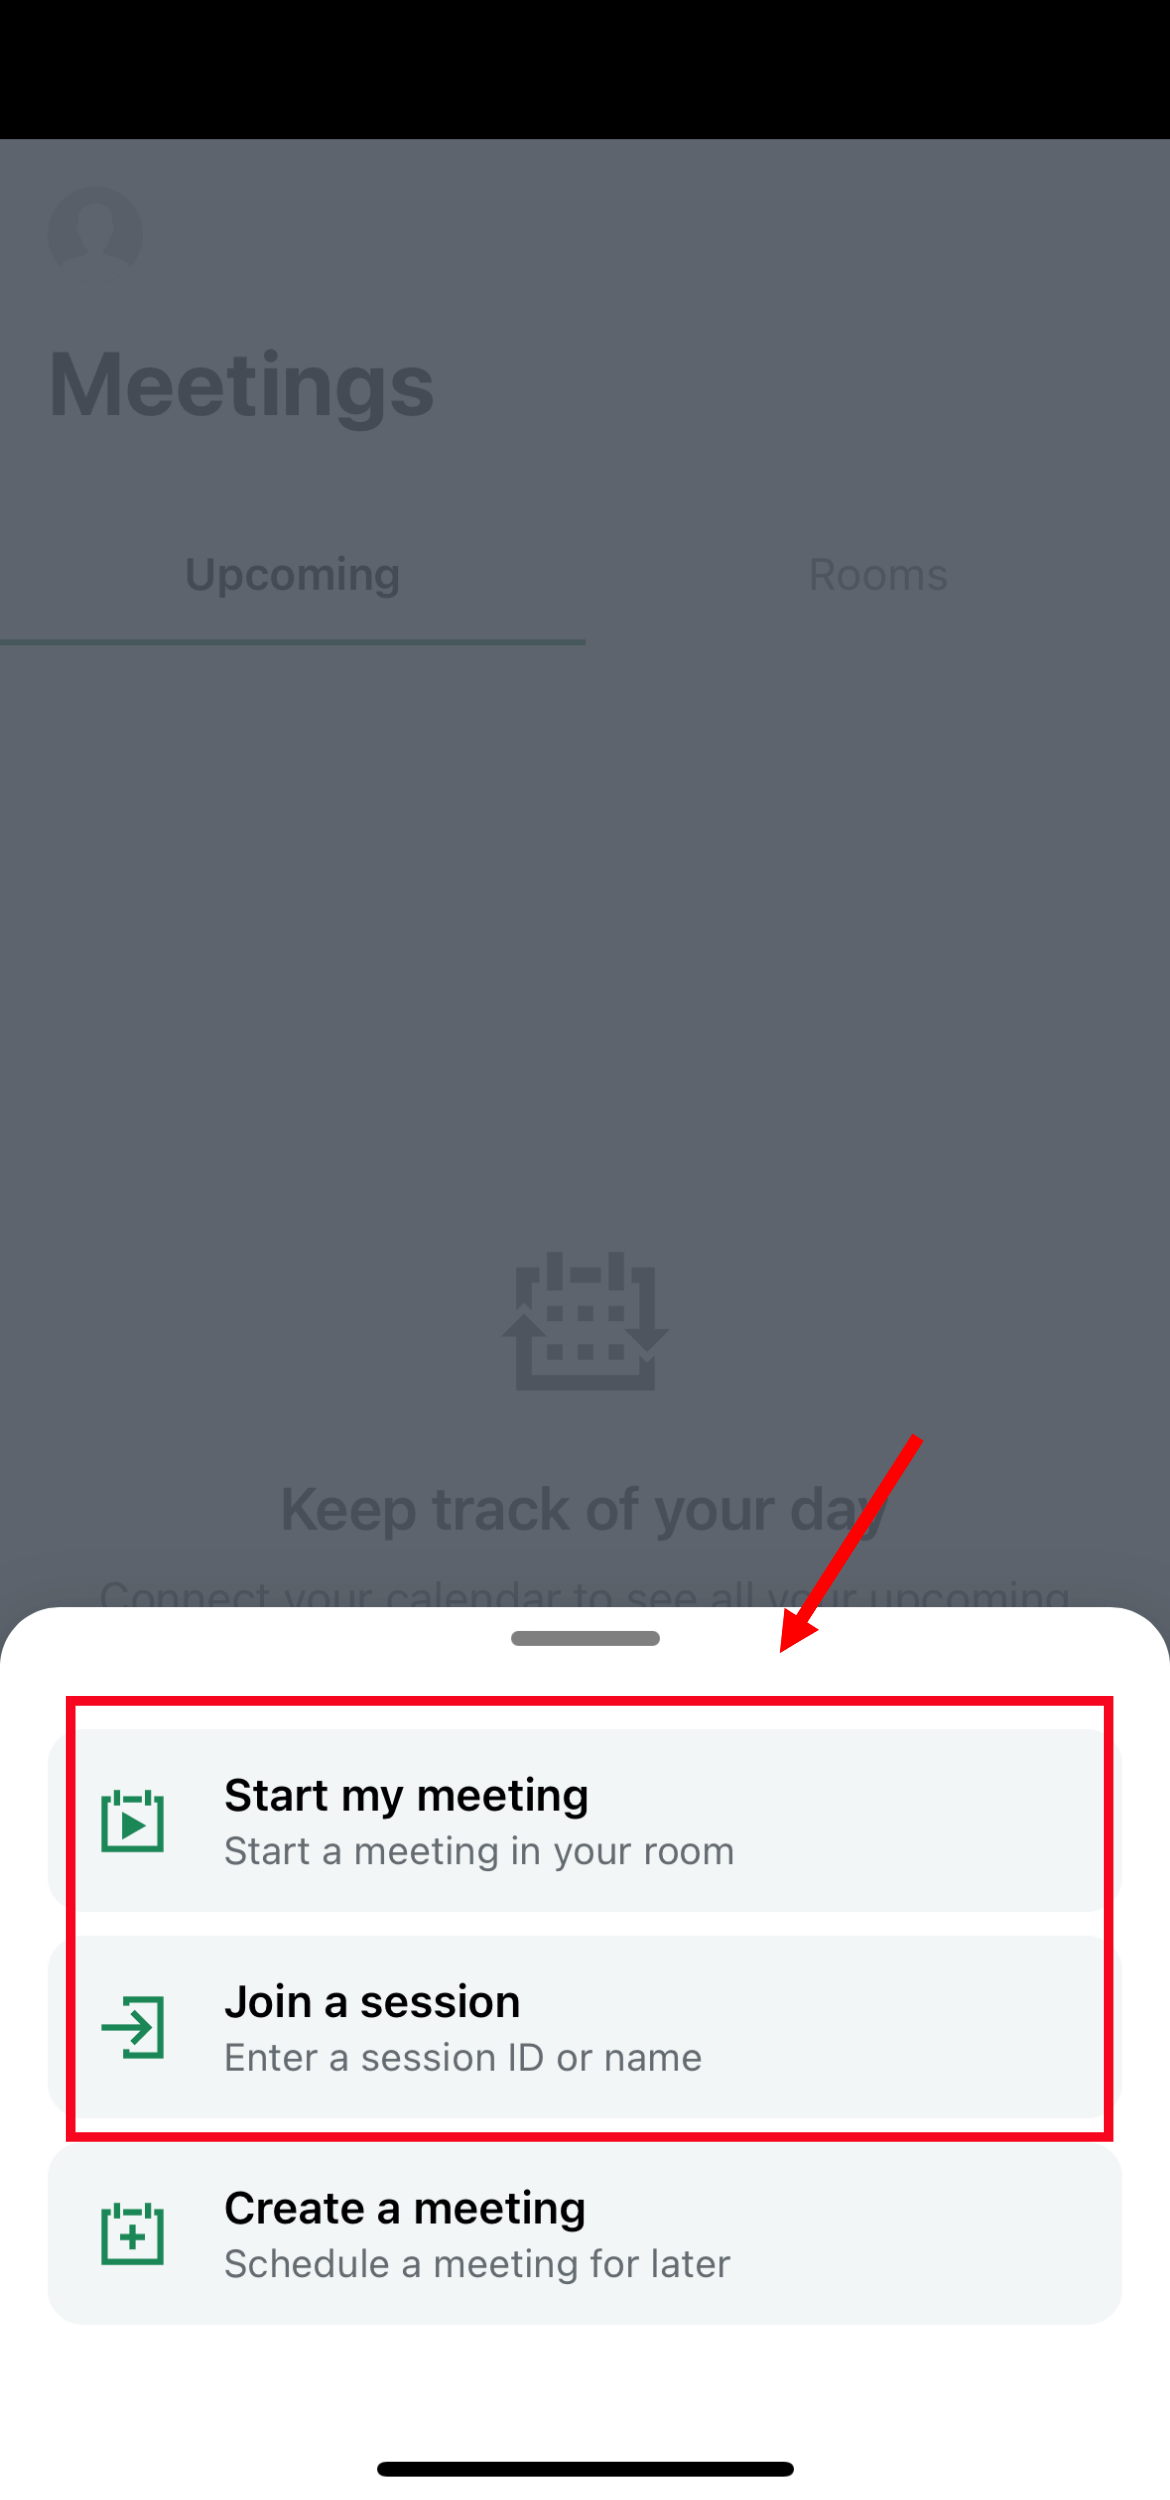 Start or join the GoToMeeting session